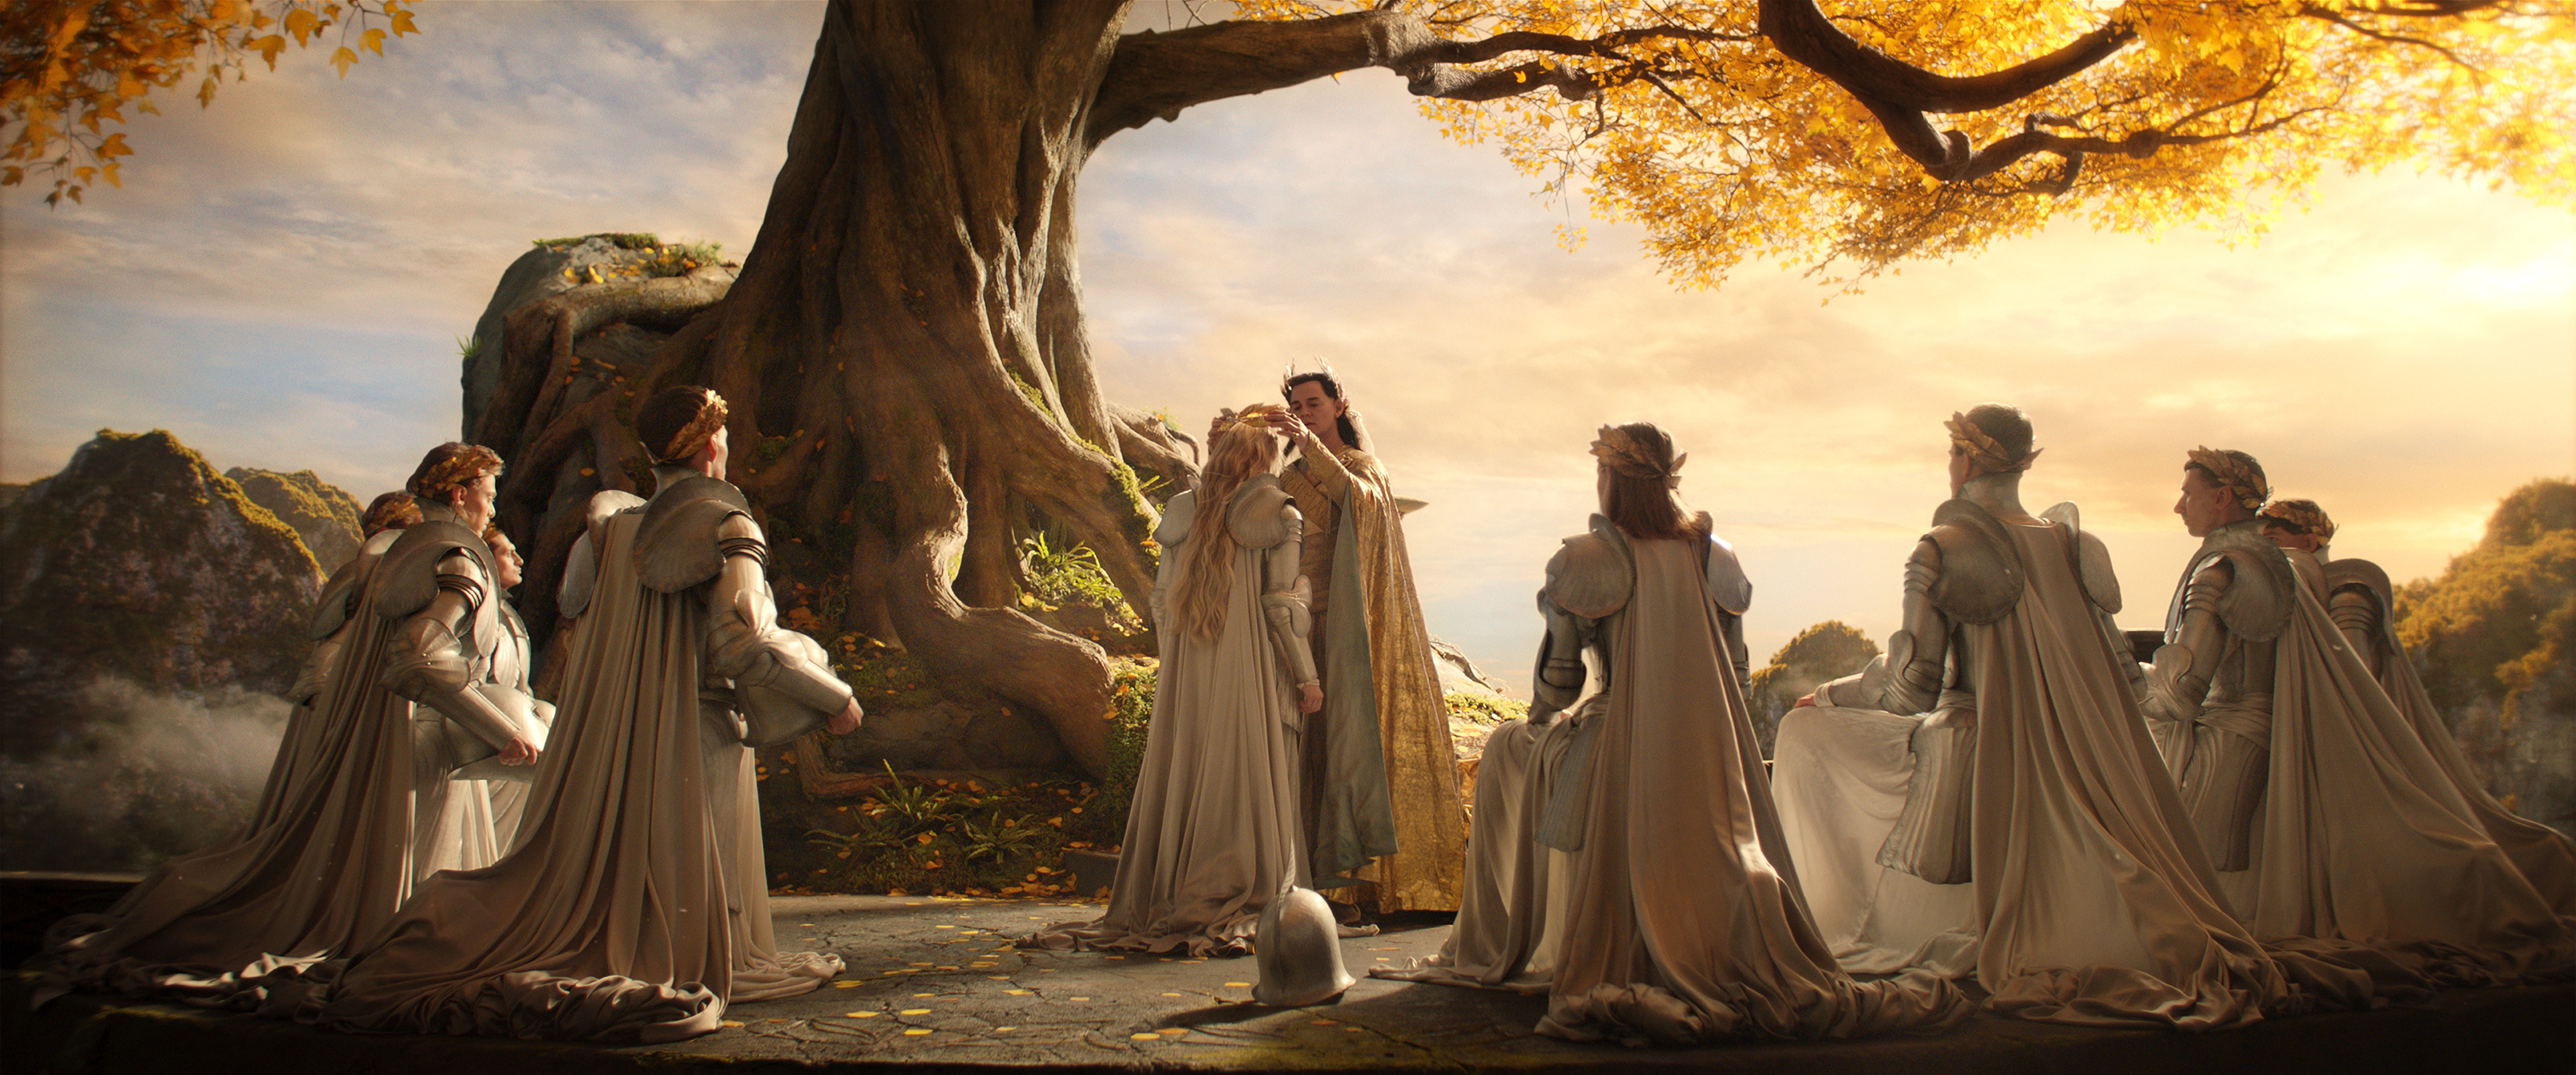 Gil-galad bestowing a crown upon Galadriel’s head as eight other elves look on, sitting in a circle around them, next to a big tree, in The Lord of the Rings: The Rings of Power